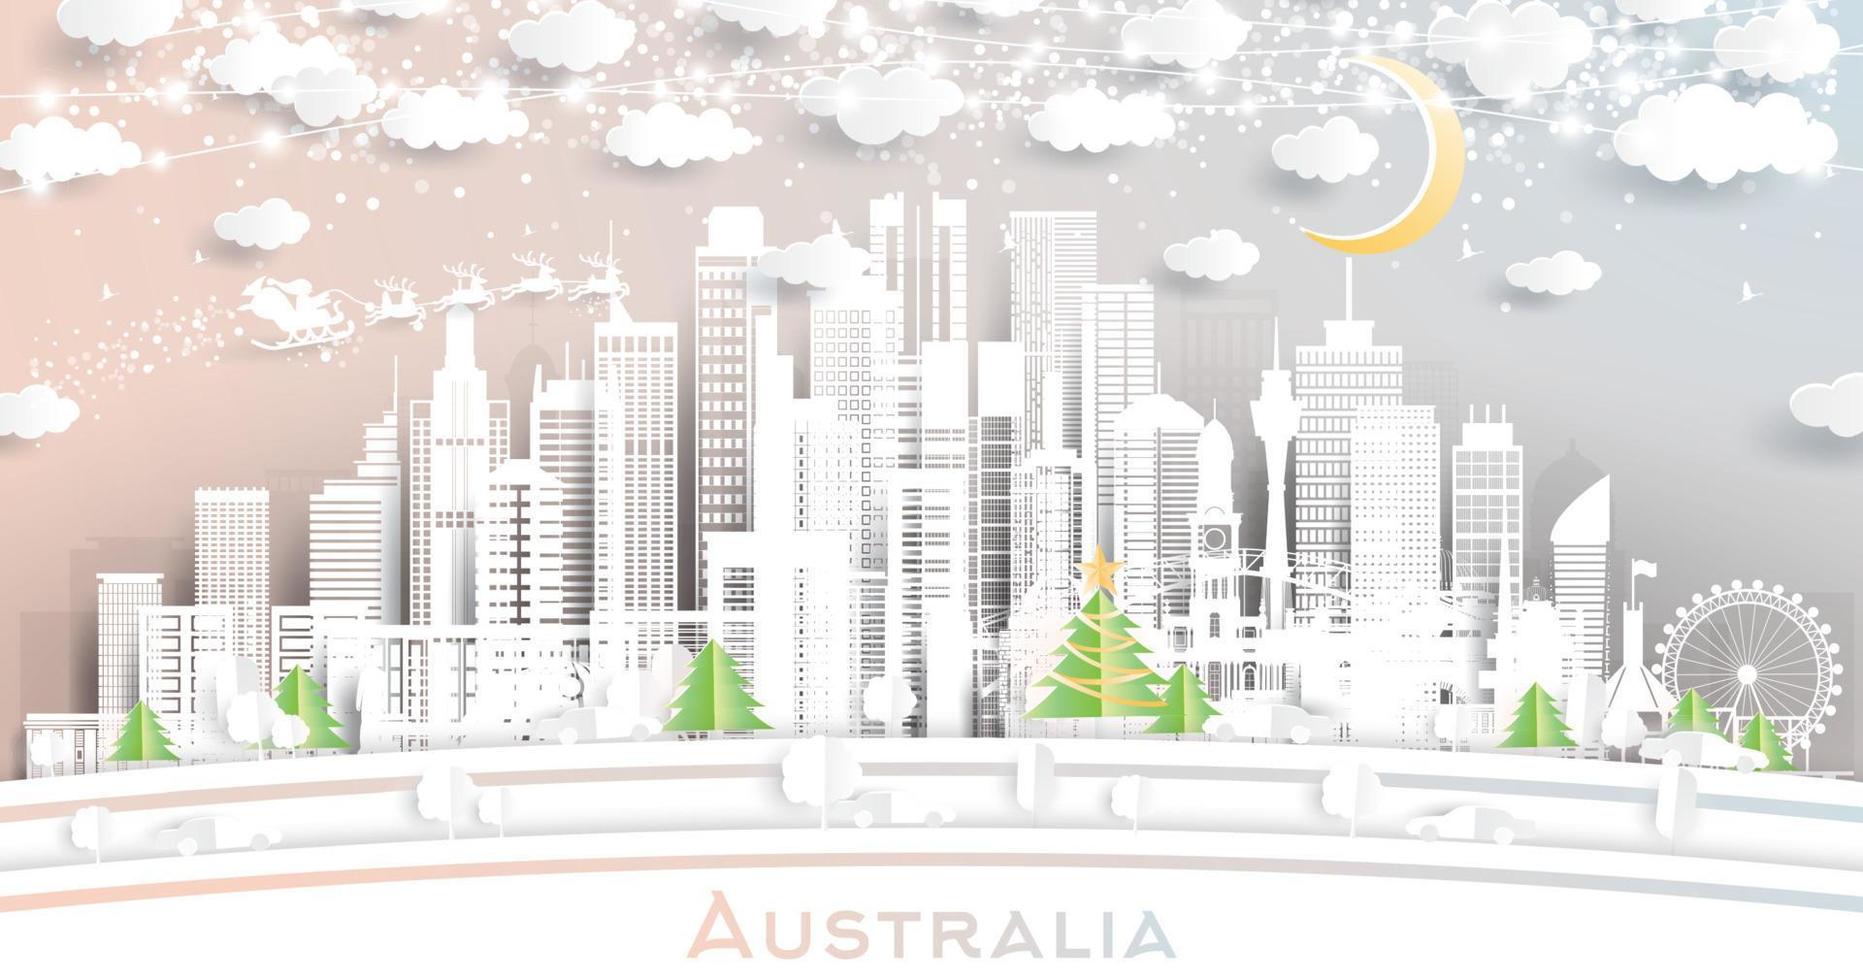 Australia City Skyline in Paper Cut Style with Snowflakes, Moon and Neon Garland. vector